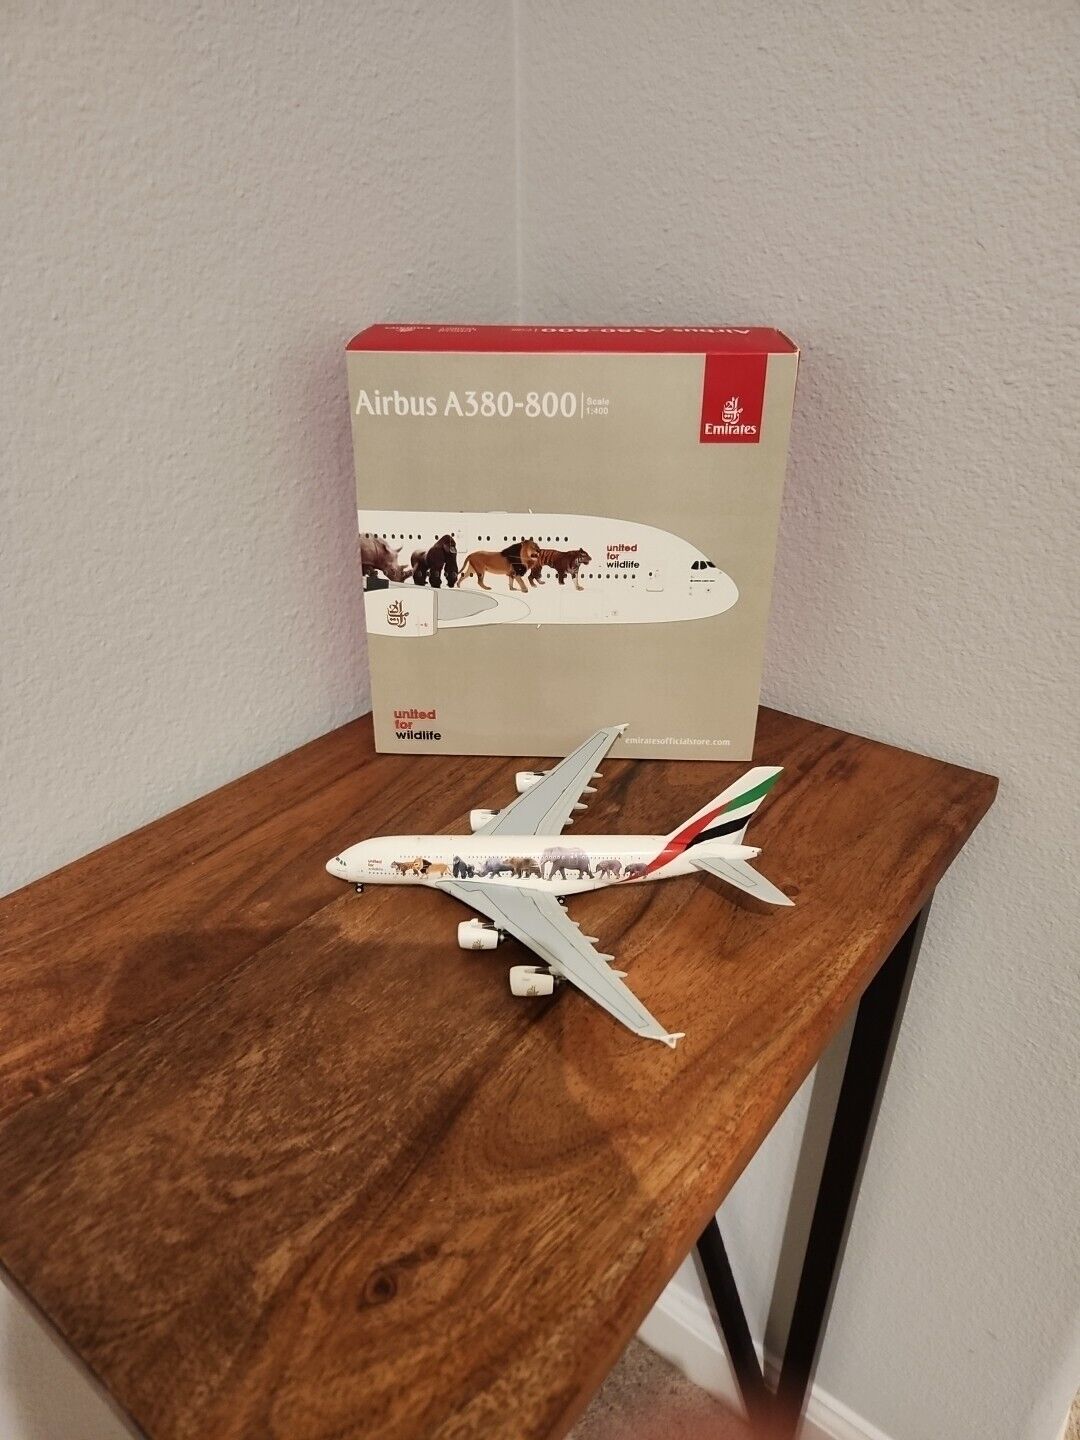 Gemini Jets 1:400 Emirates Airbus A380-800 United For Wildlife Livery